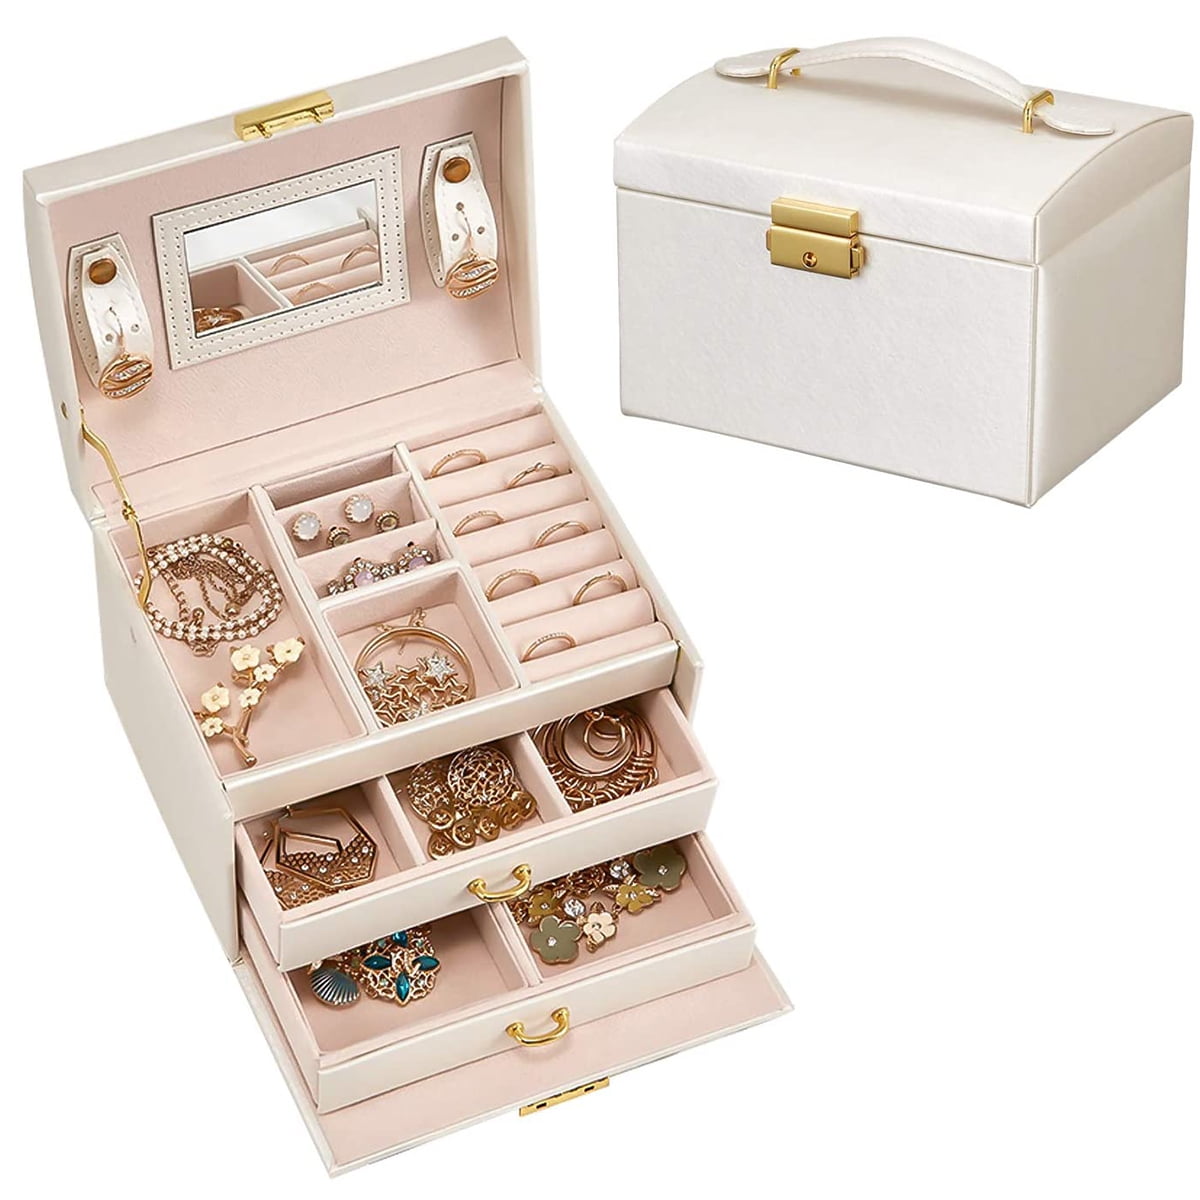 3-Tier PU Leather Larger Jewelry Case with Lock Drawers and Mirror Pink Storage Organizer for Bracelets Earrings Rings Necklaces Watches Euclidean Cube Jewelry Box Gift 